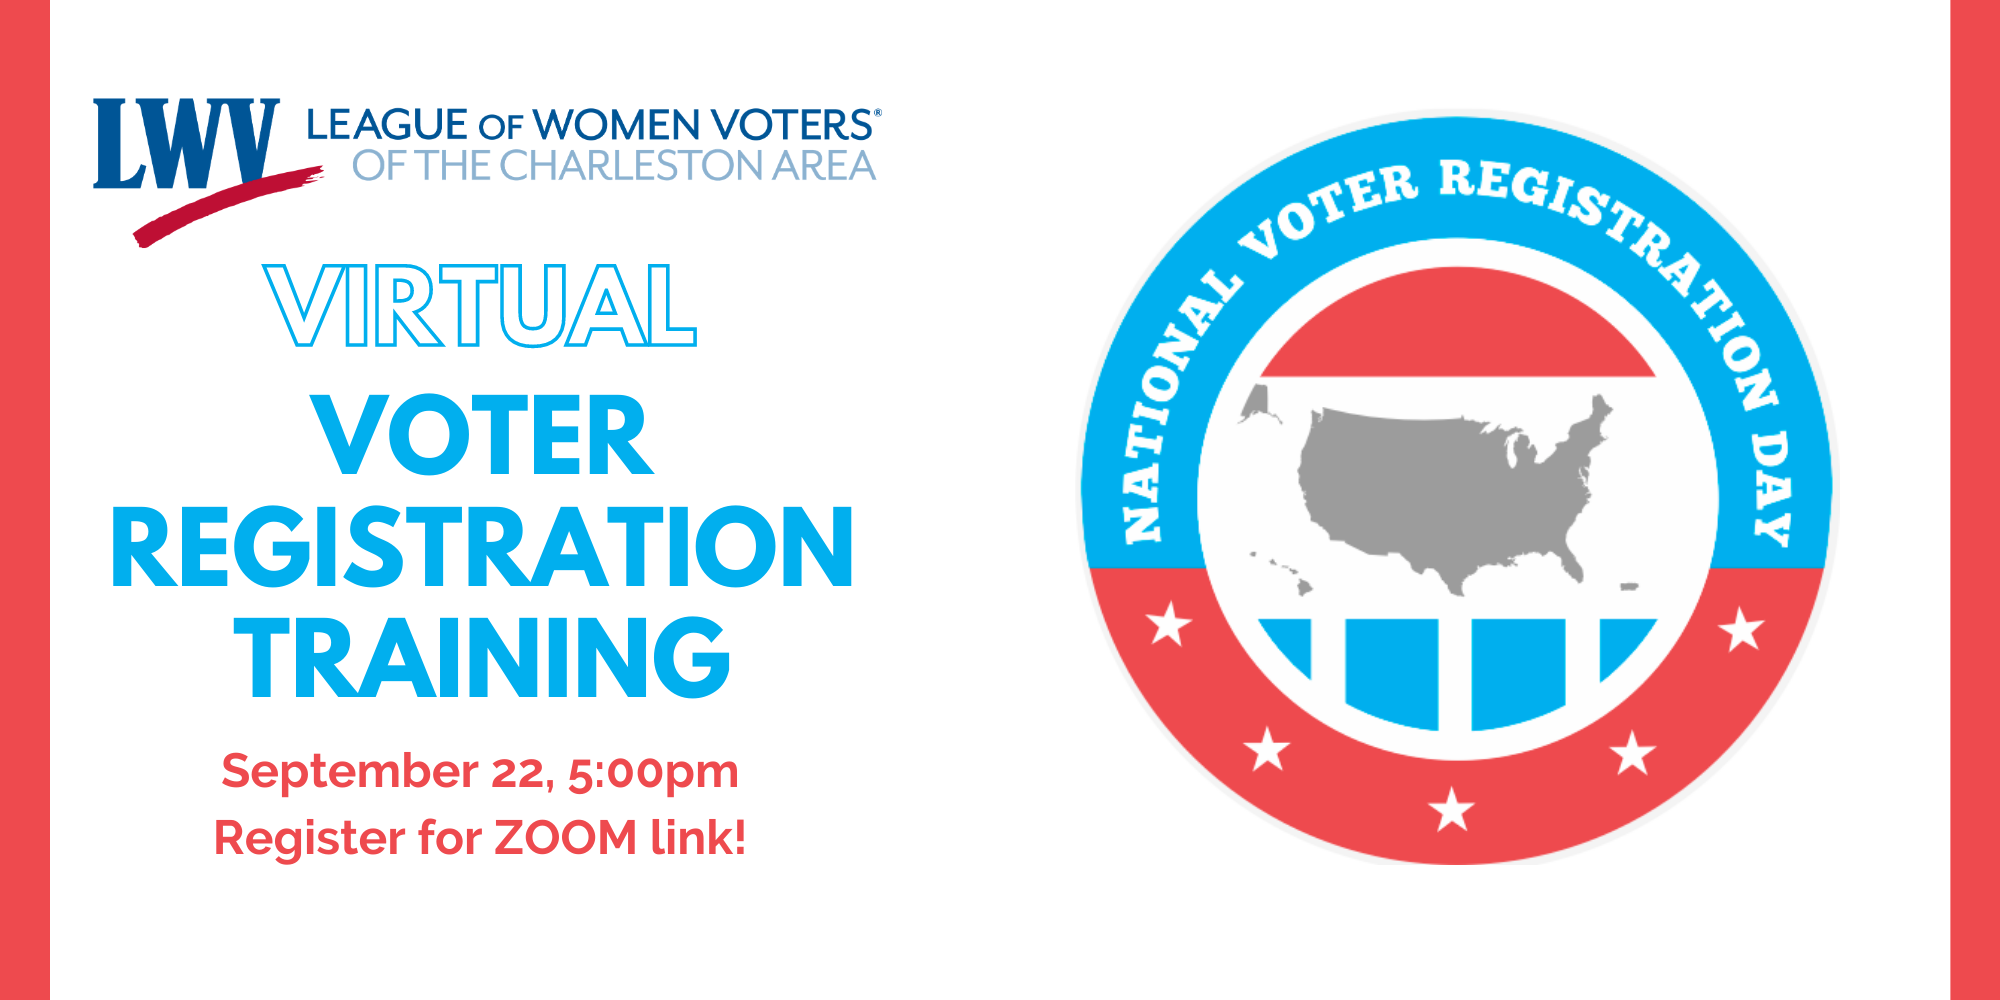 Voter Registration Training graphic, virtual event on September 22 at 5:00 pm